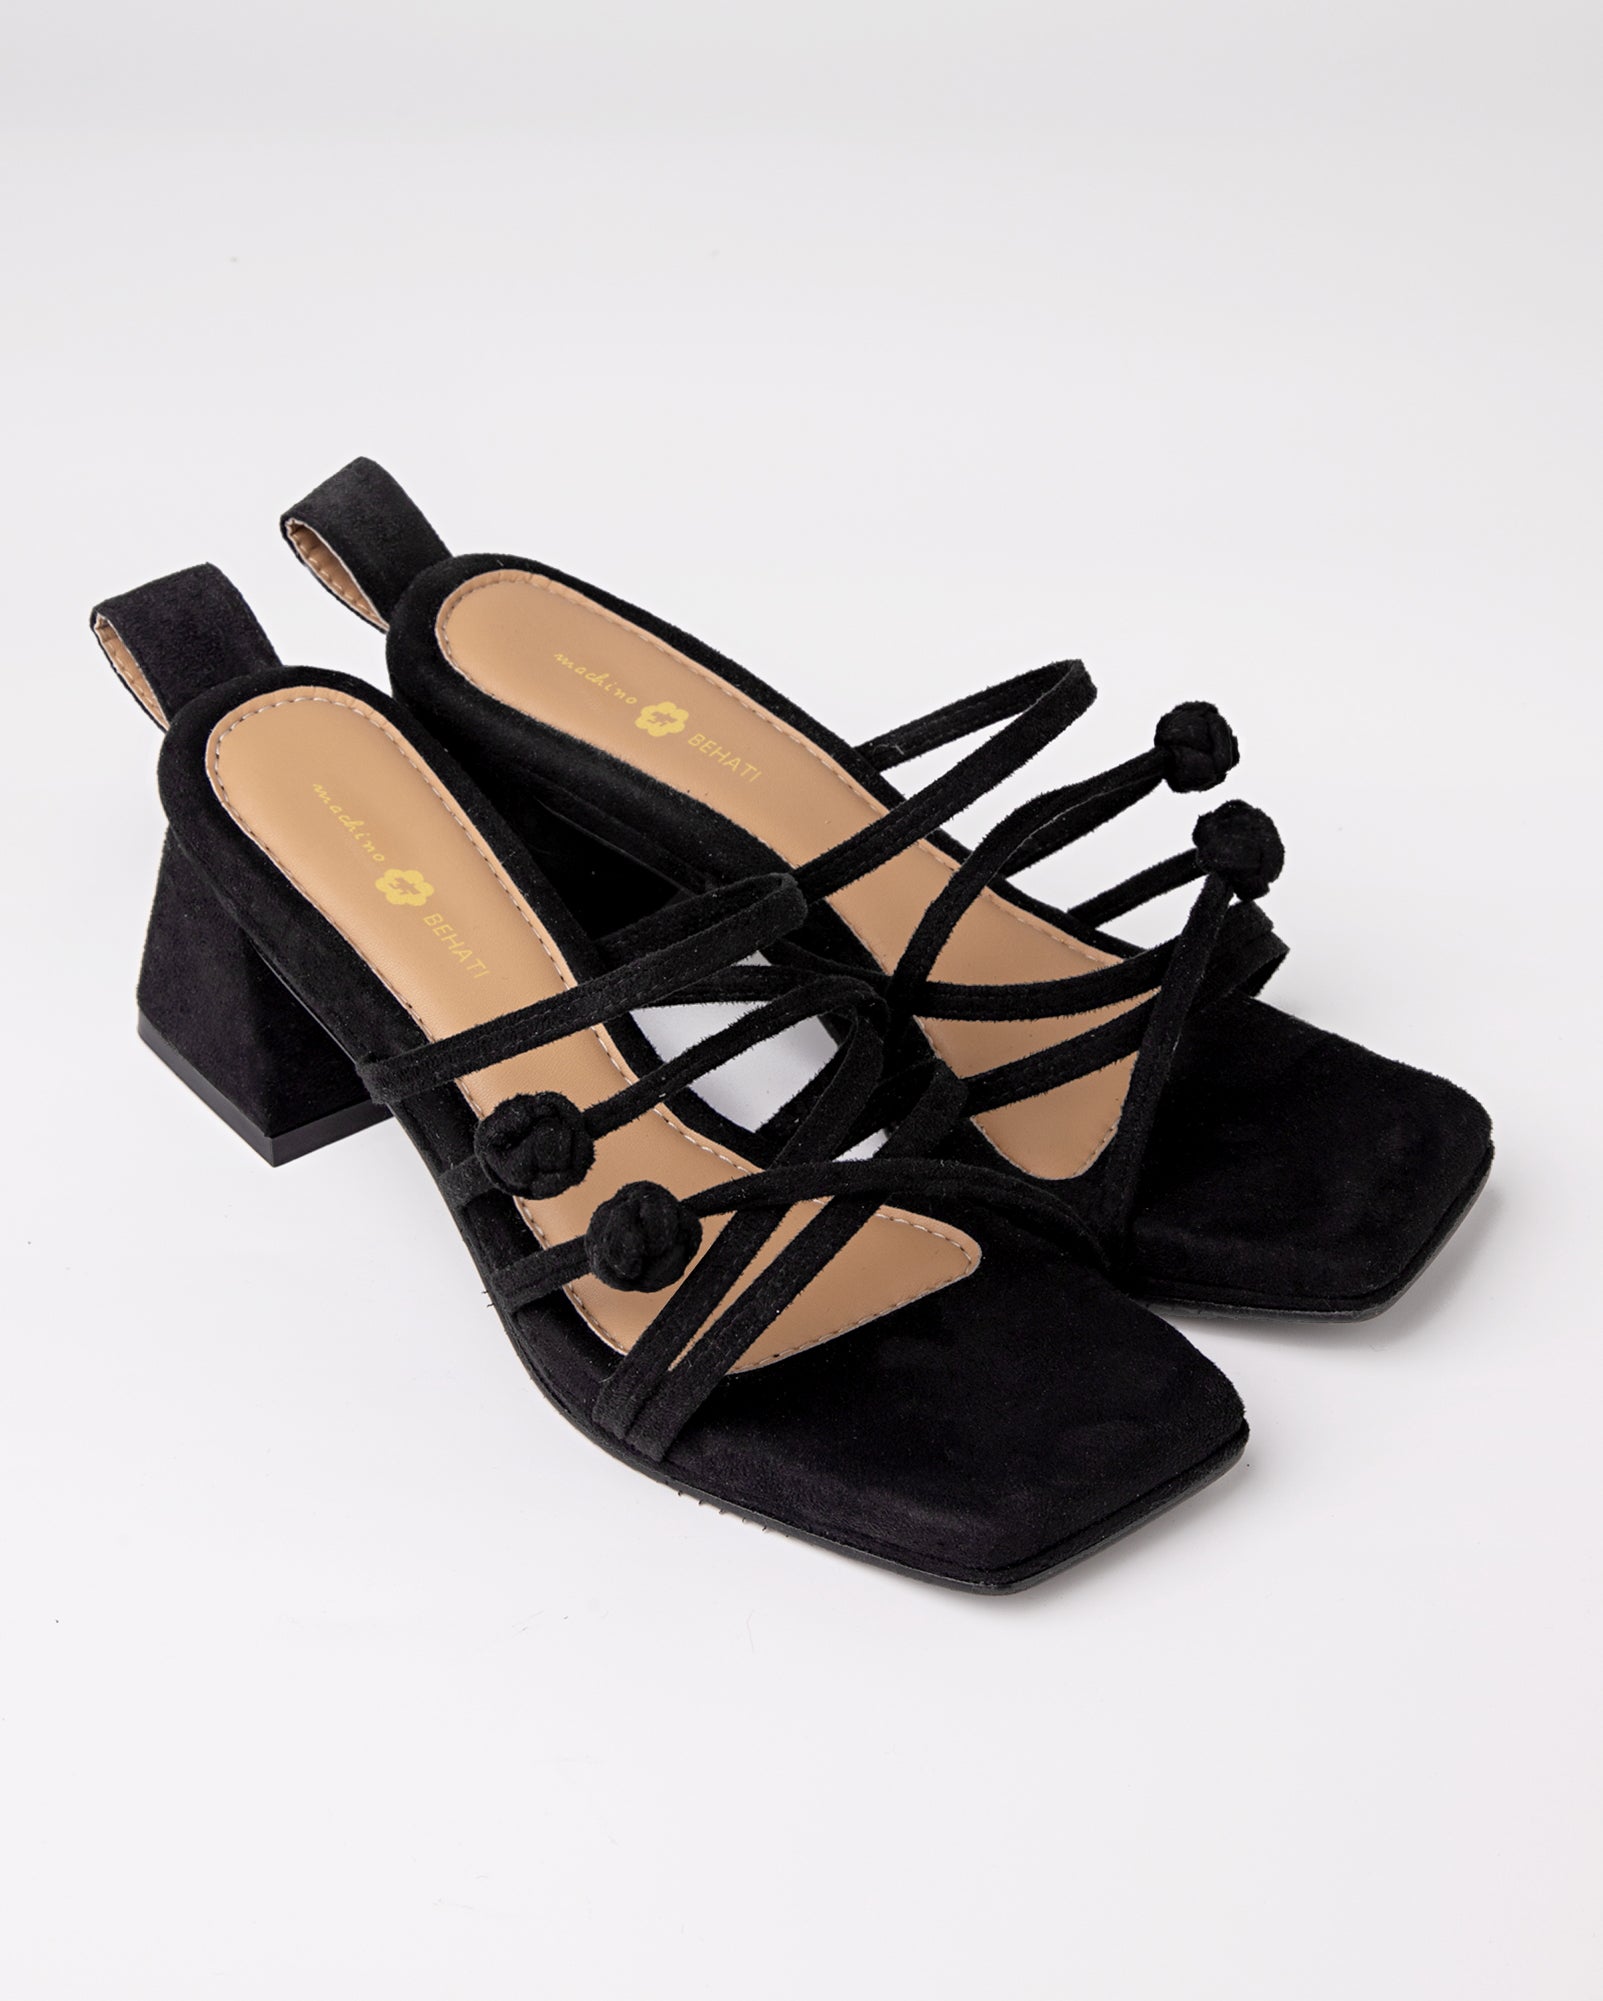 Double Chinese Knot Heels (Black Suede)